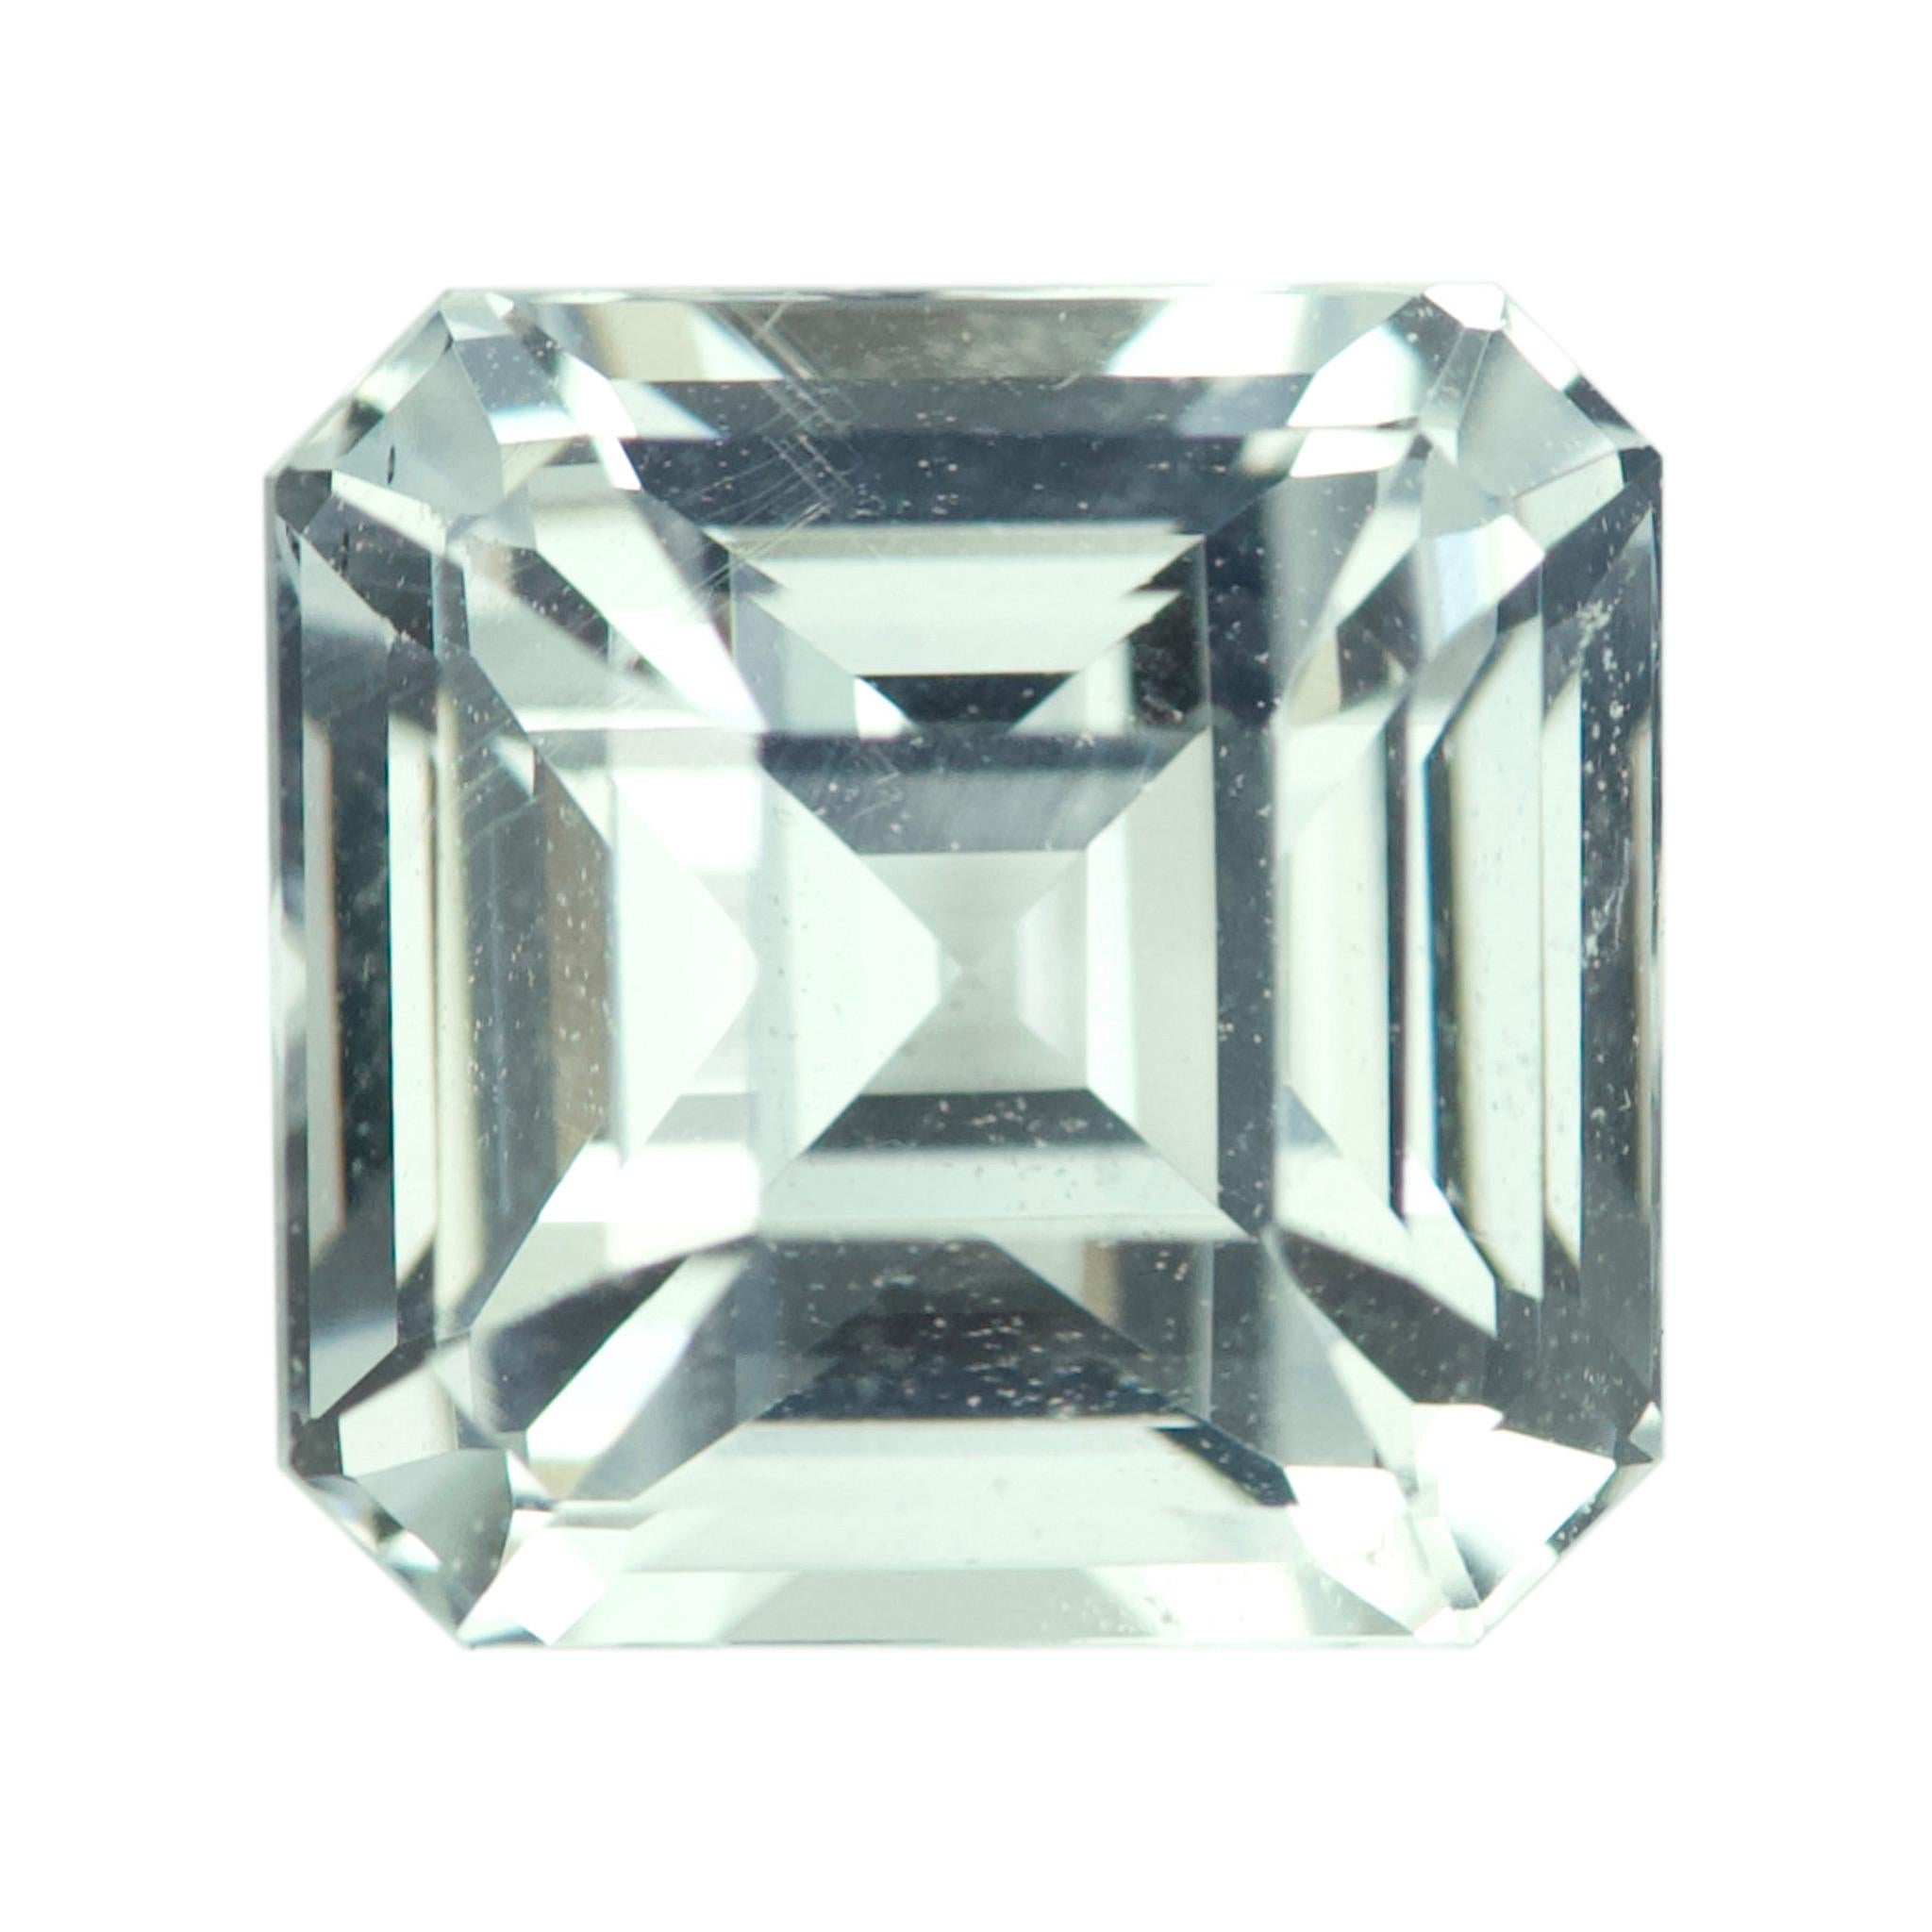 This over 2 carat square colourless sapphire is of the highest quality and originates from the island of Sri Lanka. Certified unheated, it's impressive clarity, bright shine, and excellent cut make it an ideal choice for fine jewellery. Although